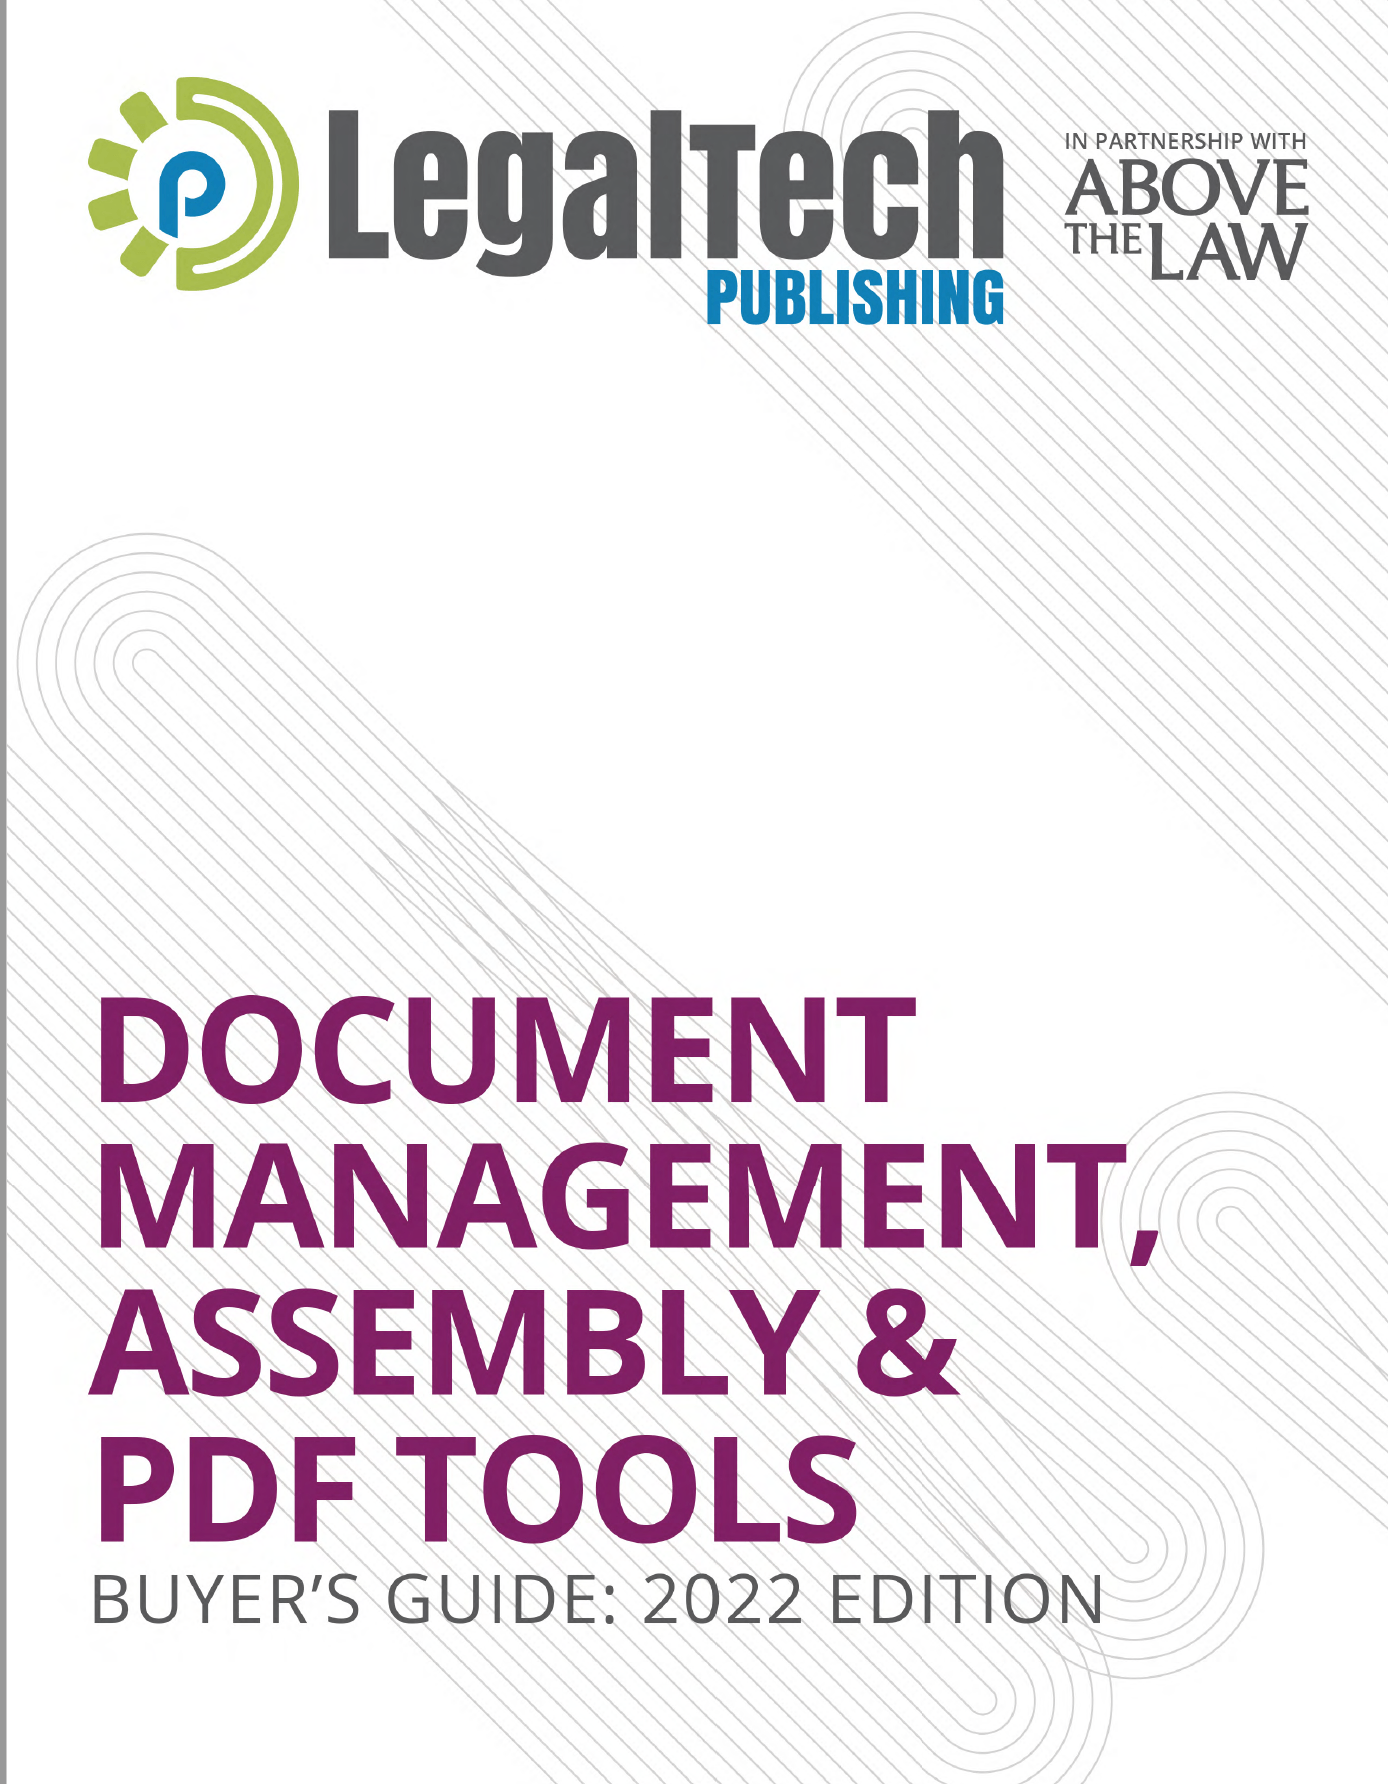 Document Management, Assembly & PDF Tools Buyer's Guide cover image 